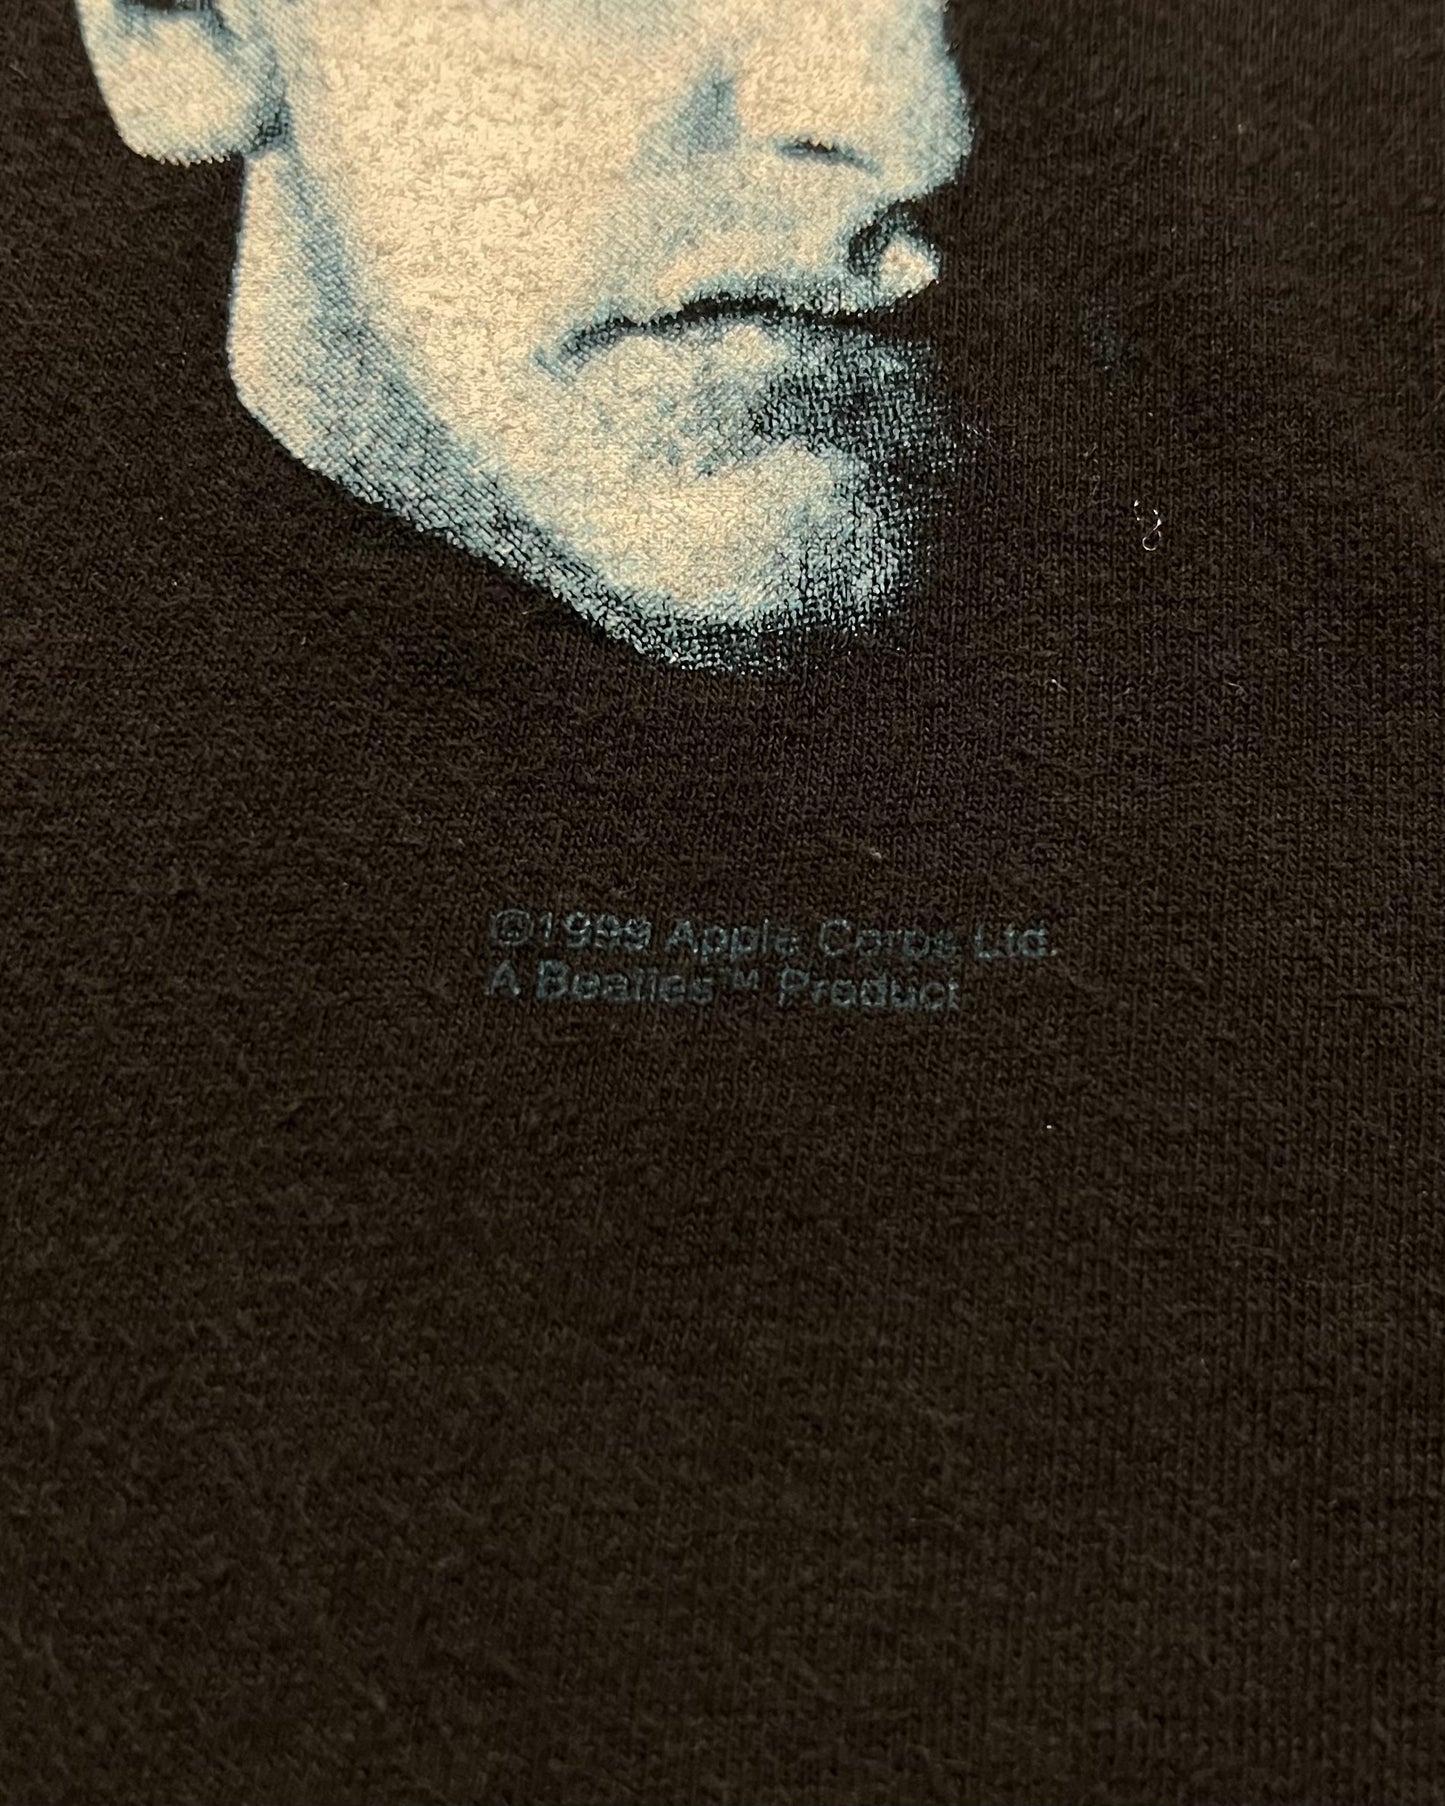 1999 "With the Beatles" T-Shirt